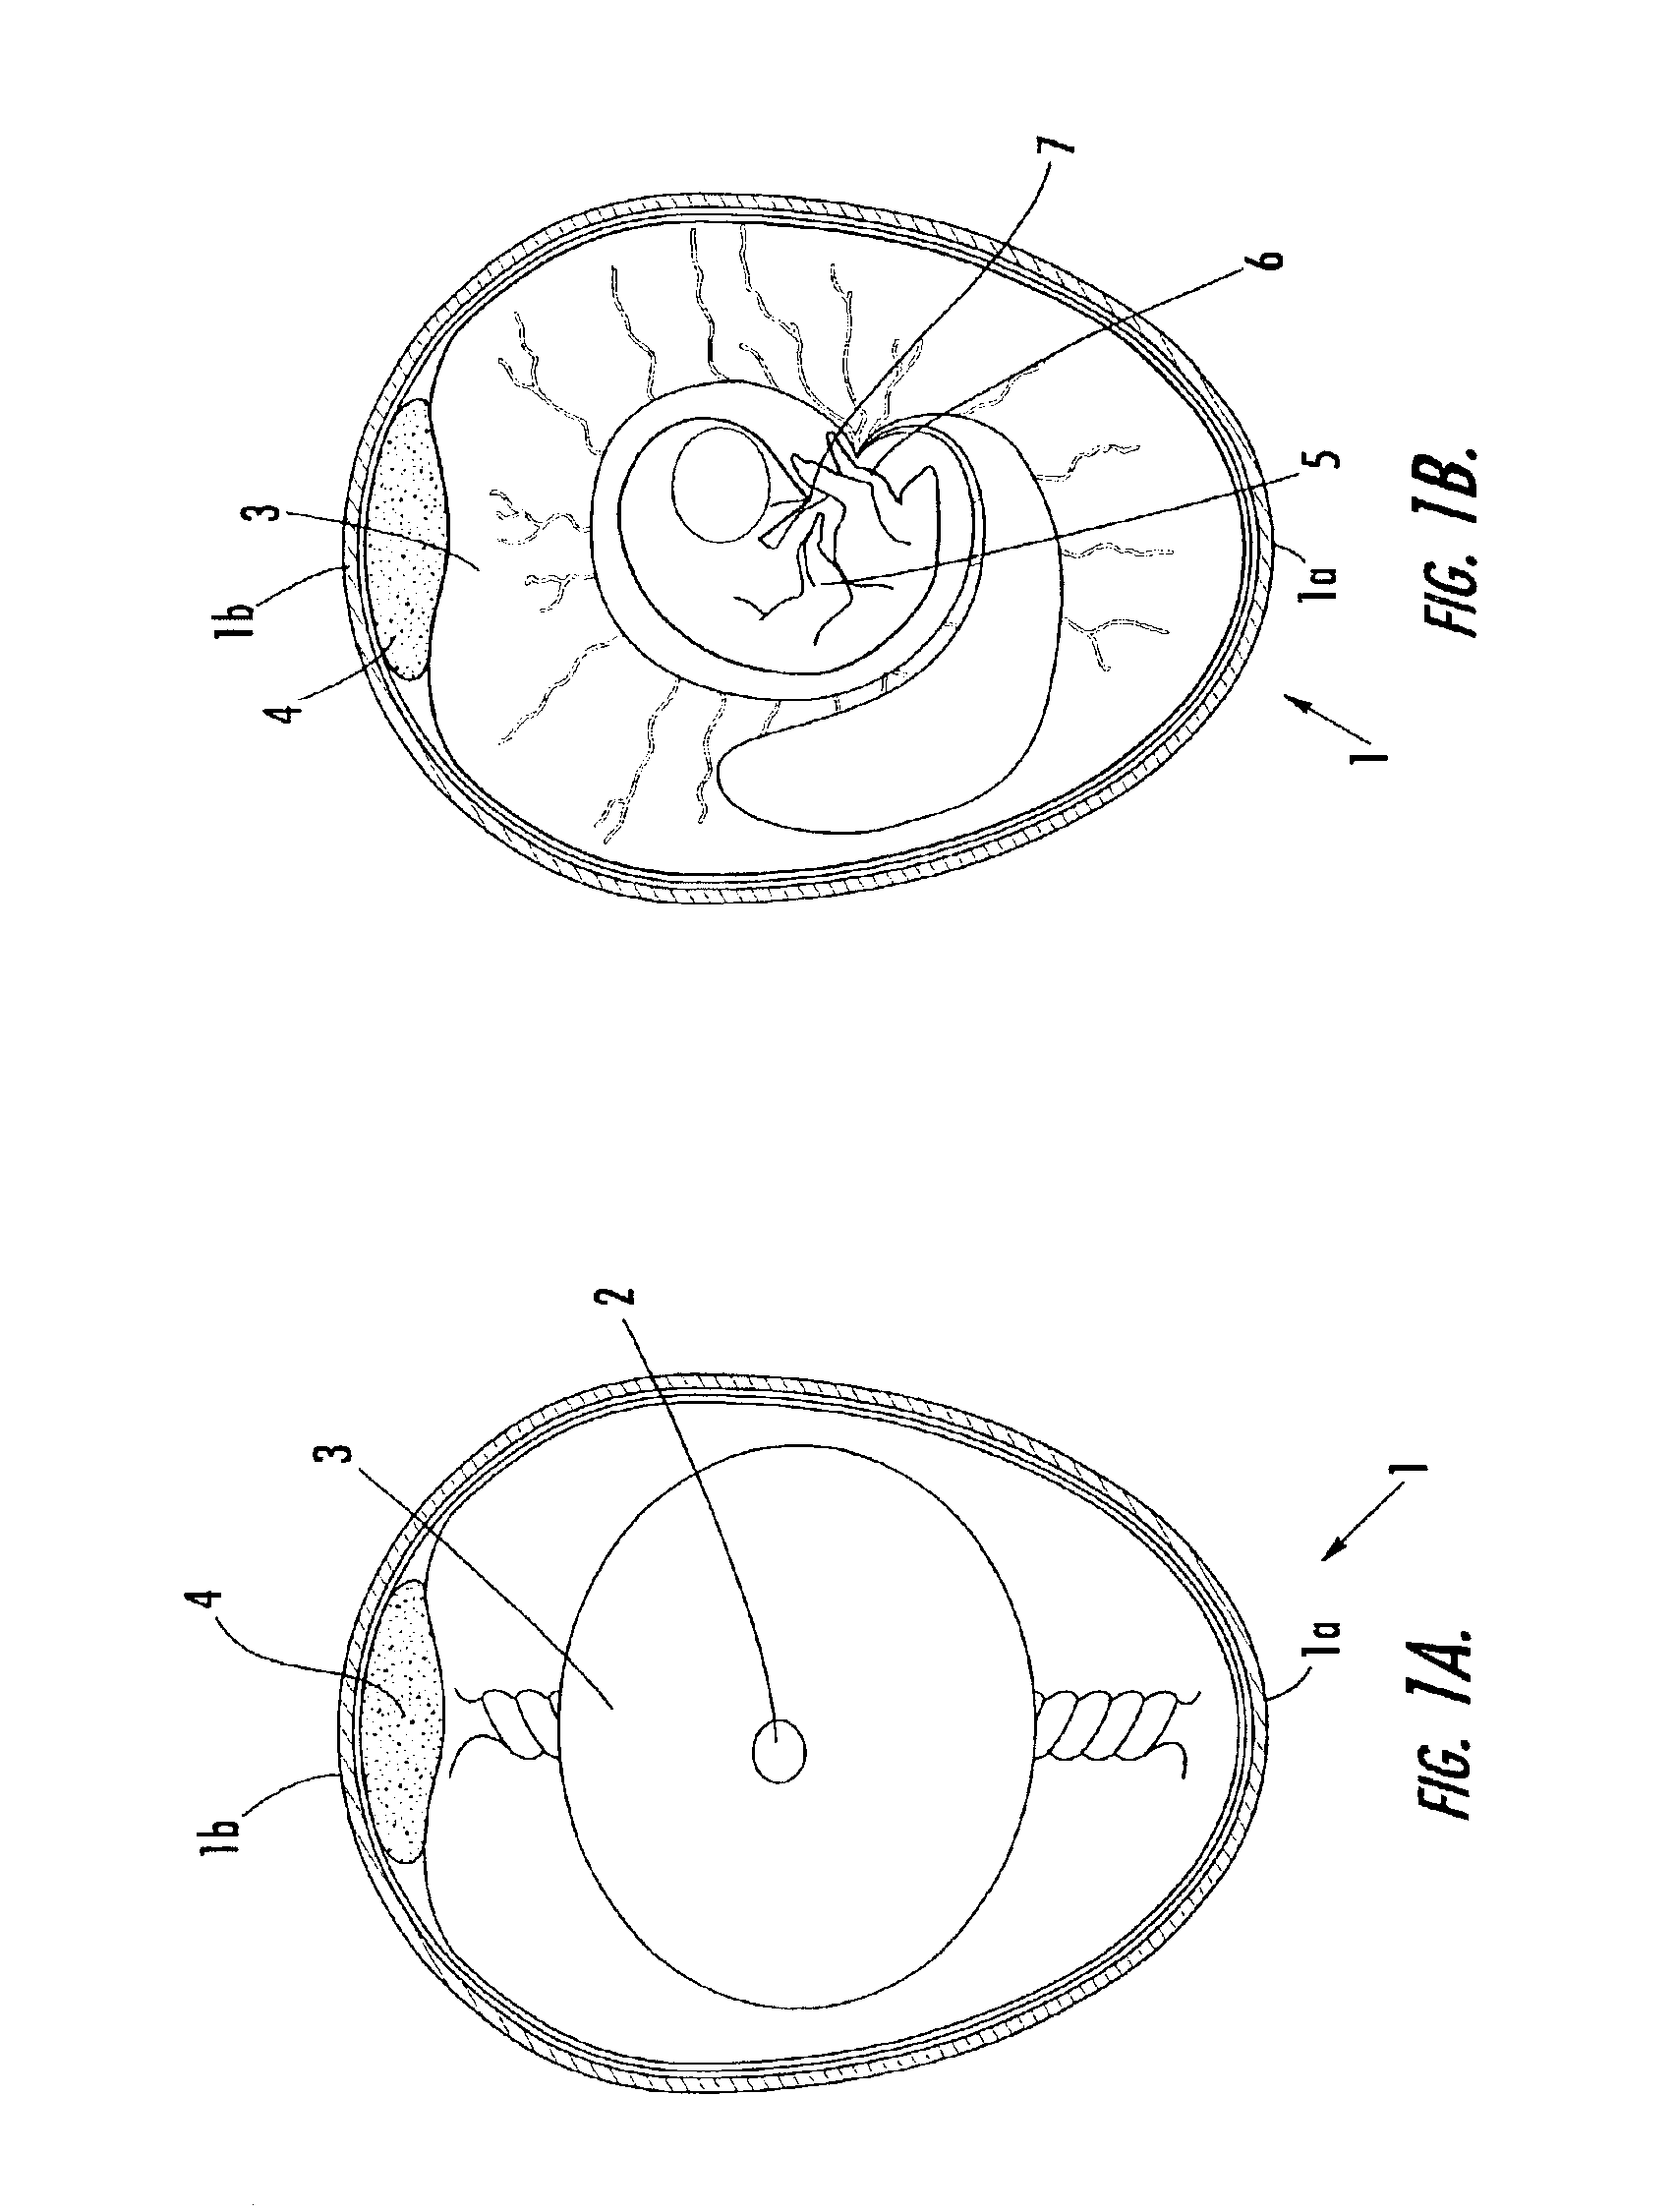 Methods and apparatus for identifying live eggs by detecting embryo heart rate and/or motion